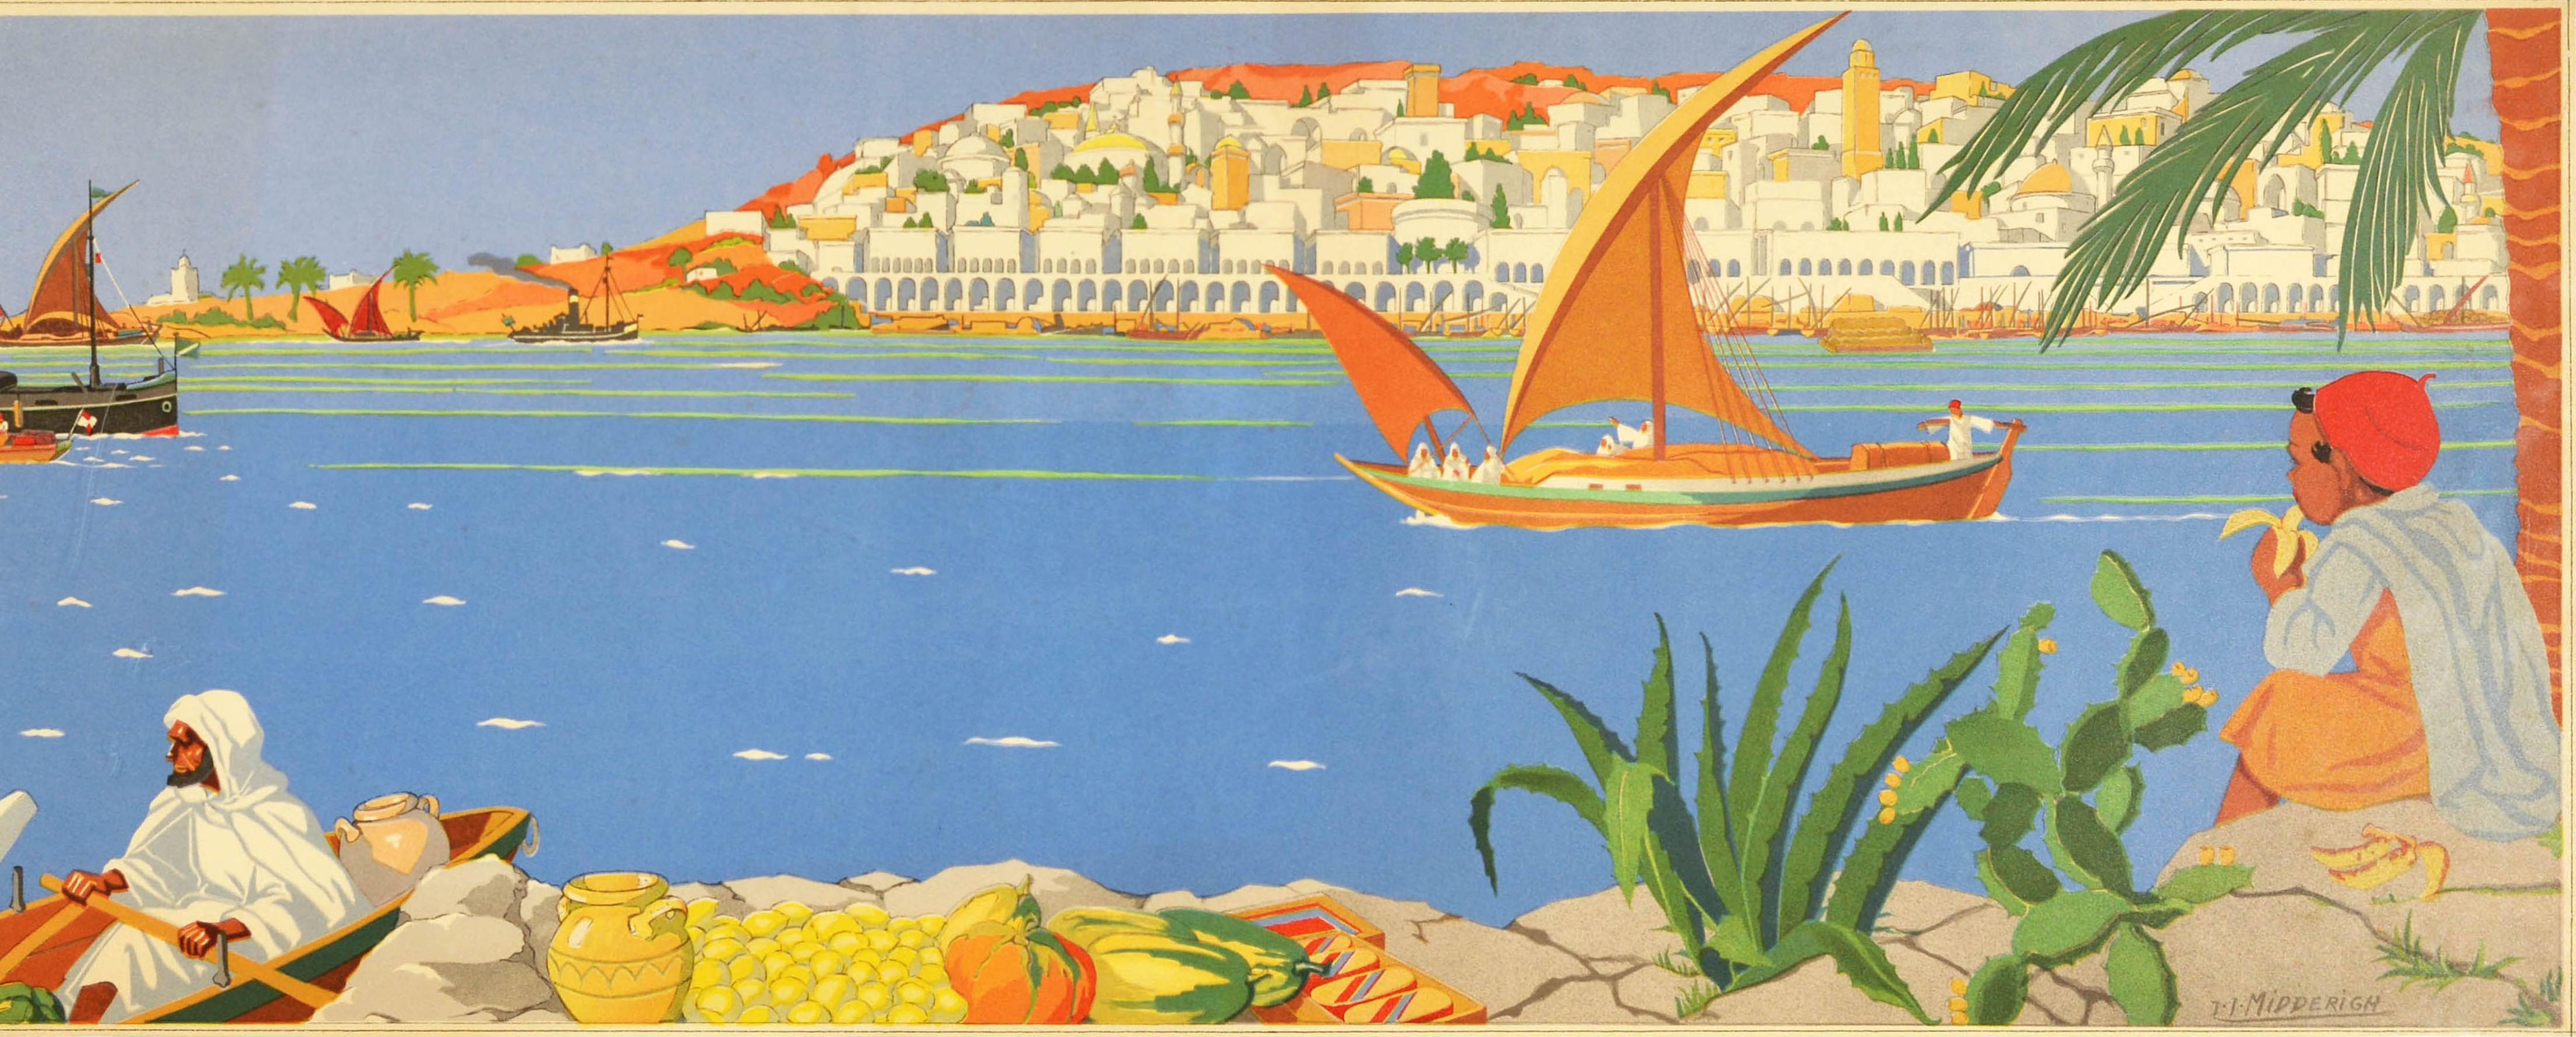 Original vintage travel poster featuring a colourful scenic artwork titled In The Near East painted by Jean Jacques Midderigh (1877-1970) showing men in rowing boats laden with tropical fruit and a boy sitting on rocks eating a banana under a palm